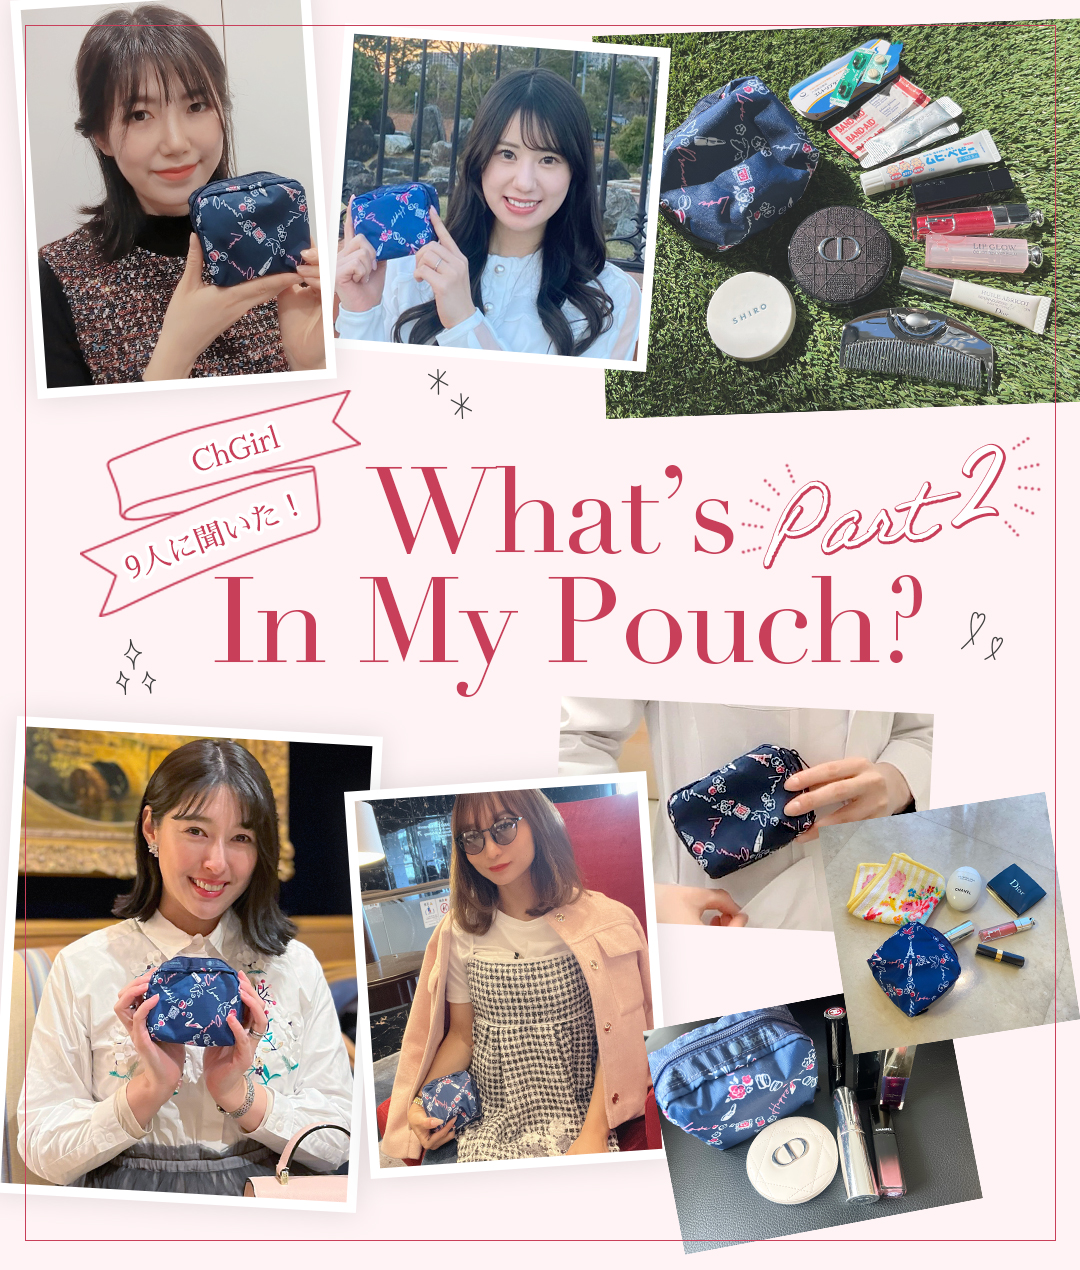 ChGirl9人に聞いた！What's What's In My Pouch？Part2